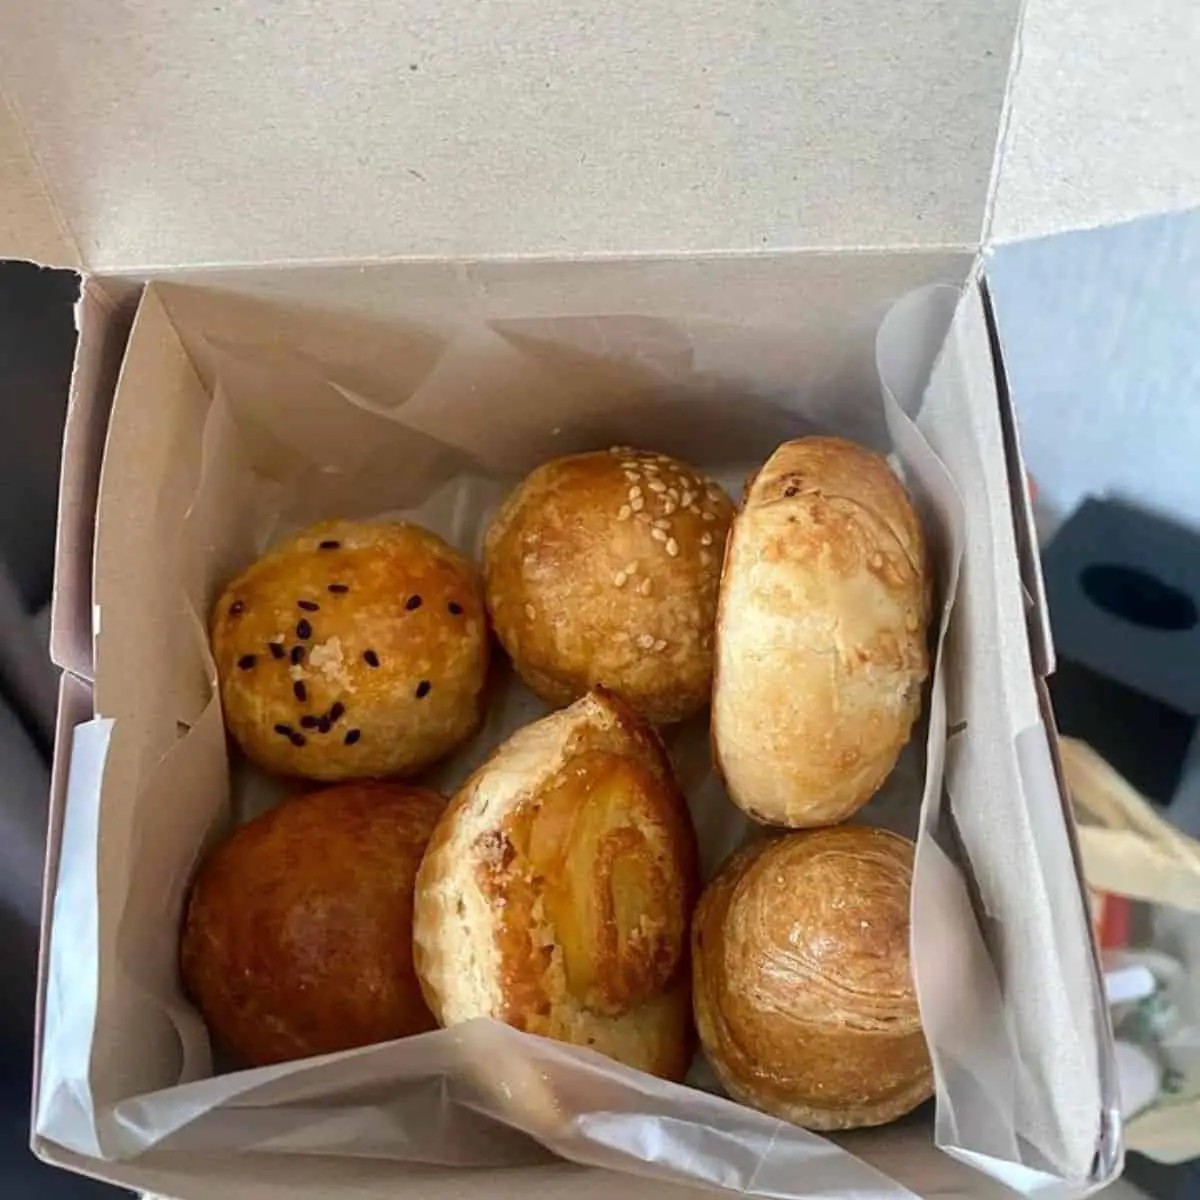 Six delectable baked pastries from Seng Seng Hiang with black and white sesame seeds on top in a grey box